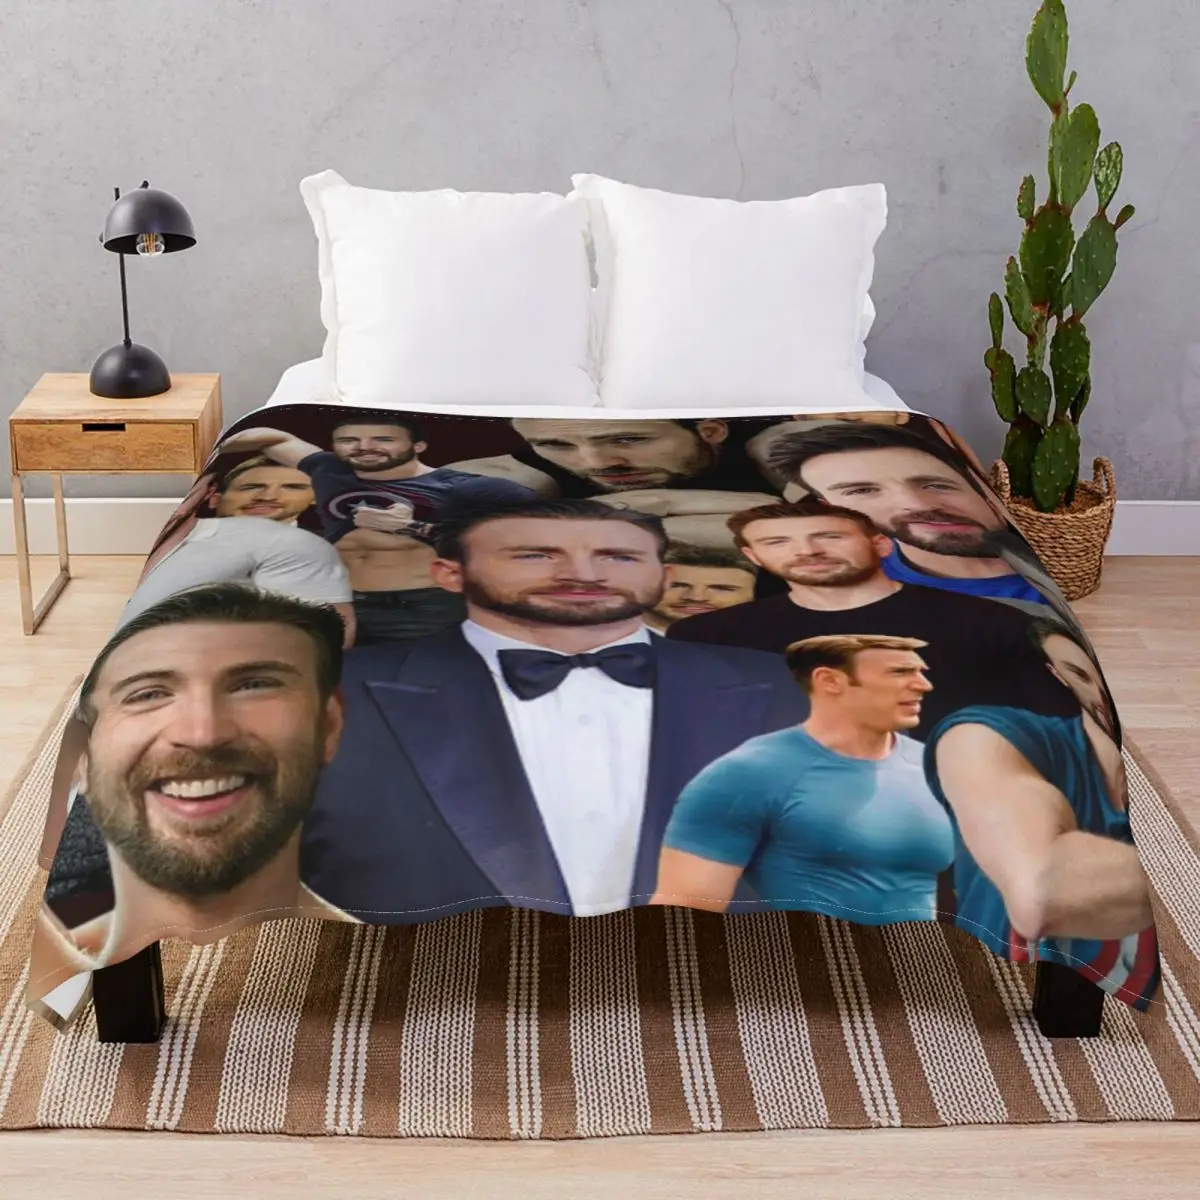 Chris Evans Photo Collage Blanket Fleece Decoration Warm Throw Blankets for Bed Sofa Camp Office